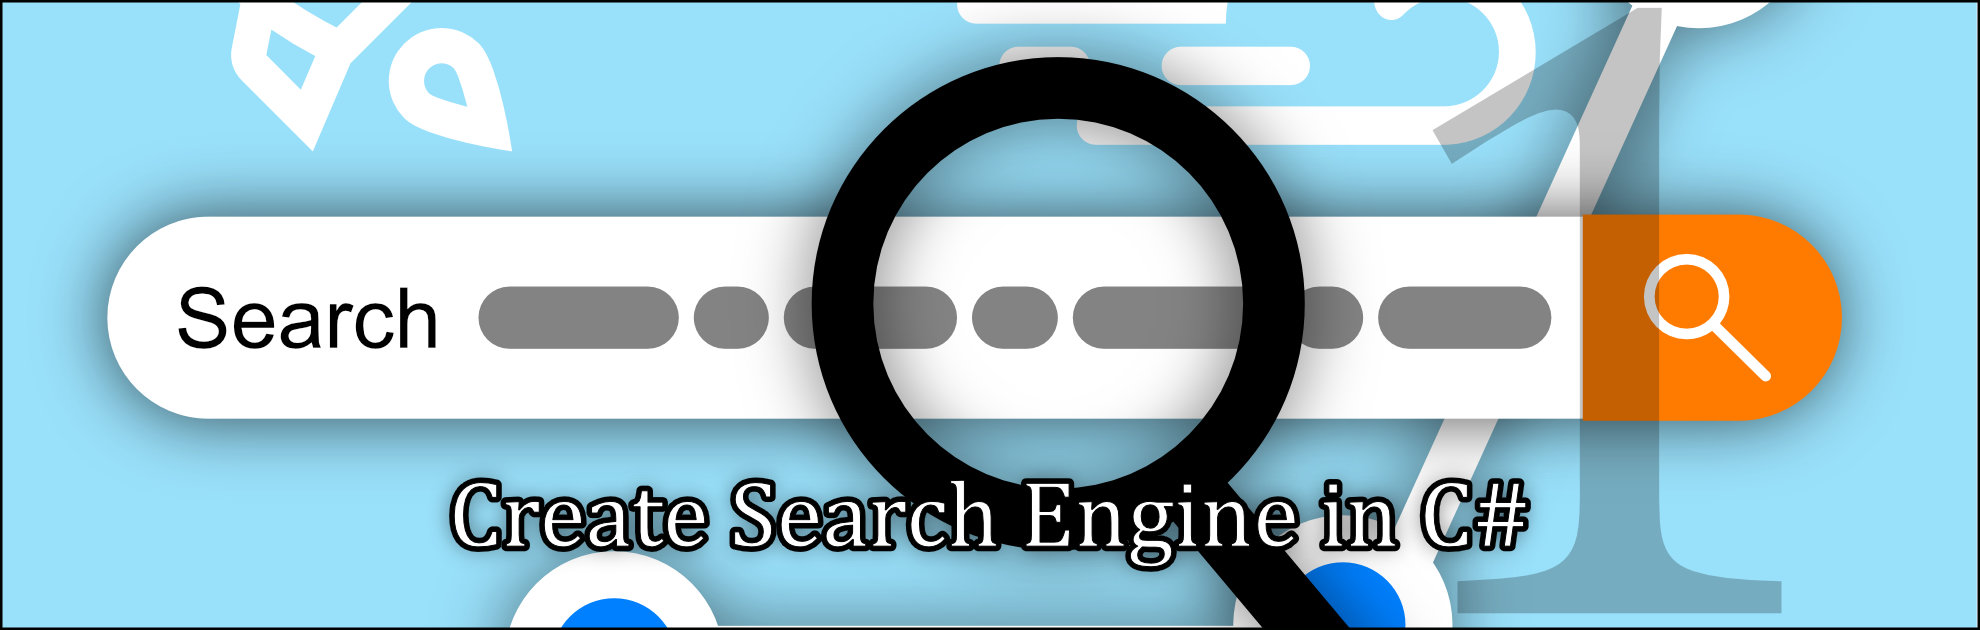 Search Engine in C#